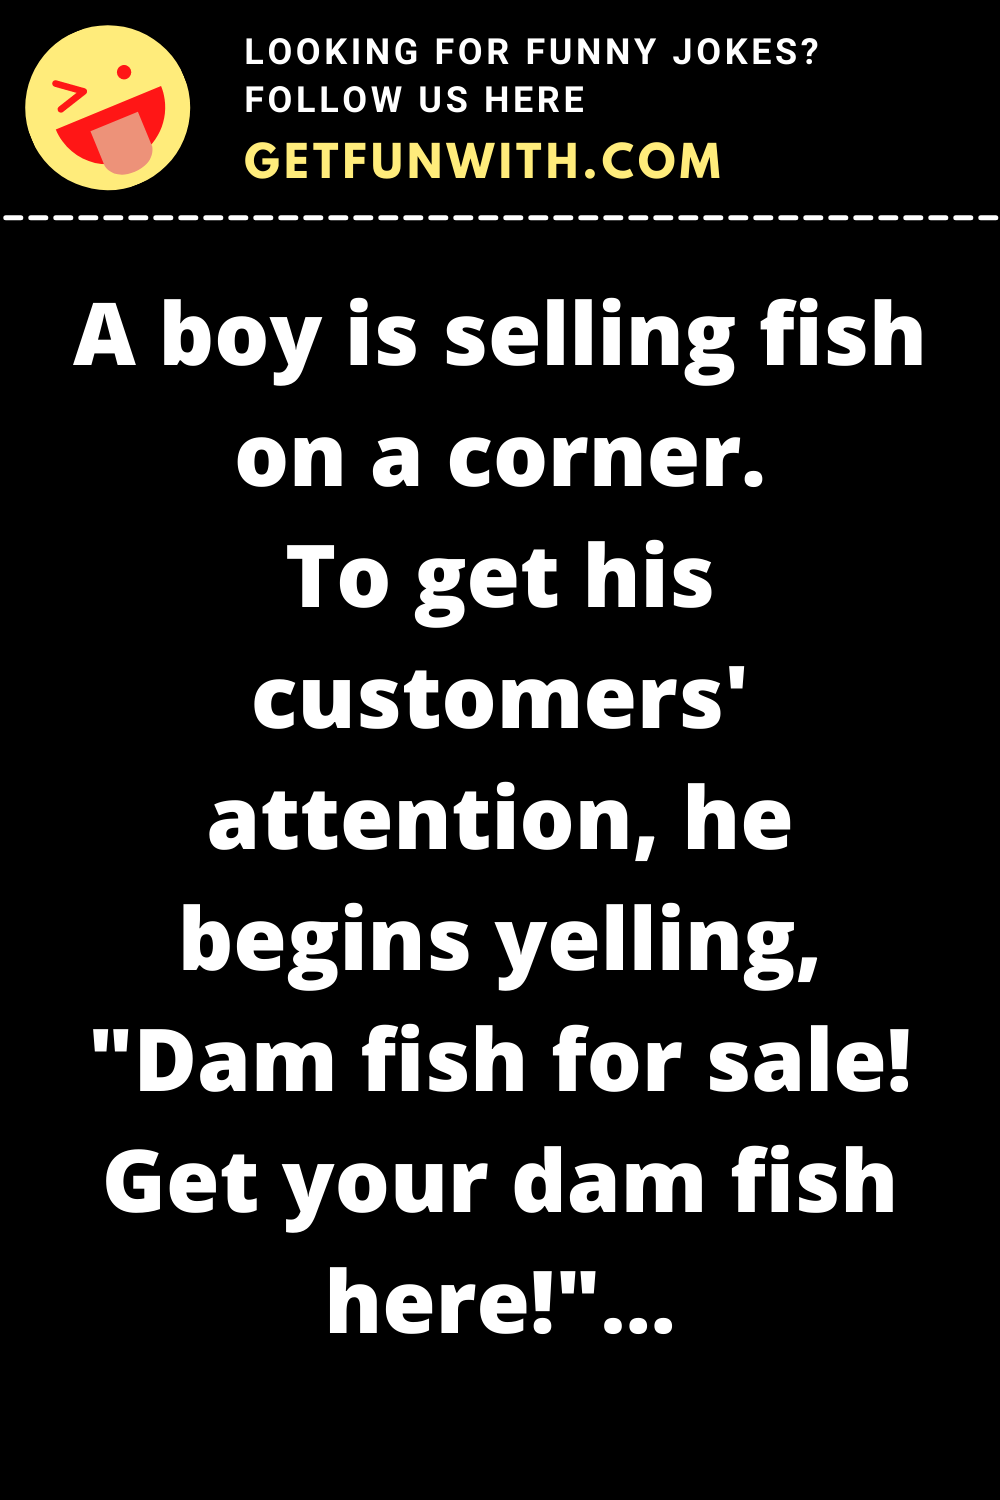 A boy is selling fish on a corner.